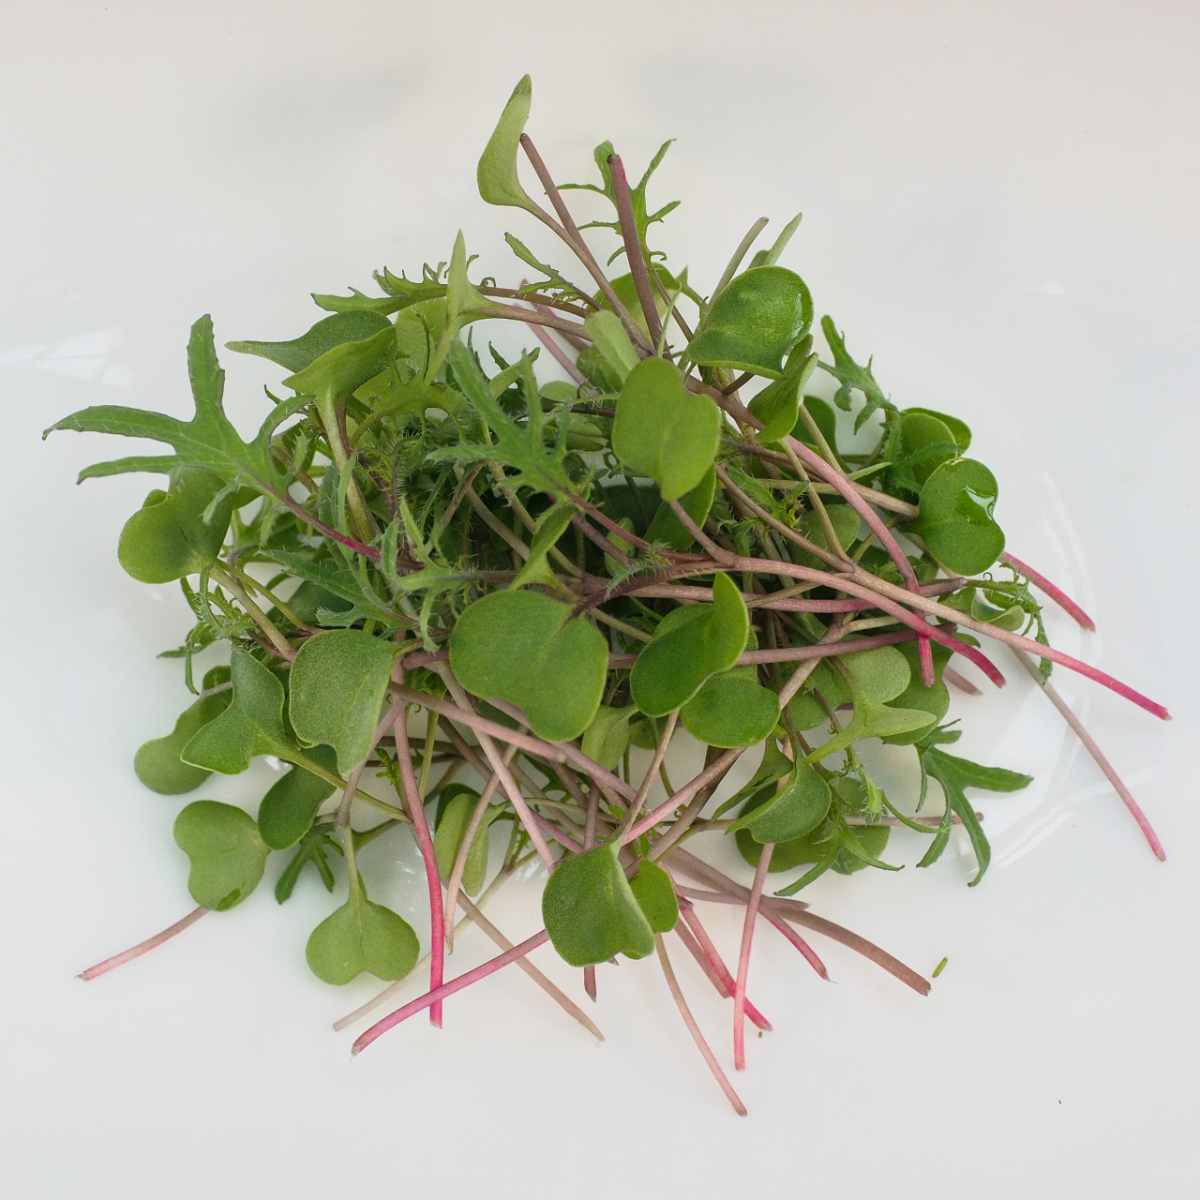 red-russian-kale-microgreens-new-product